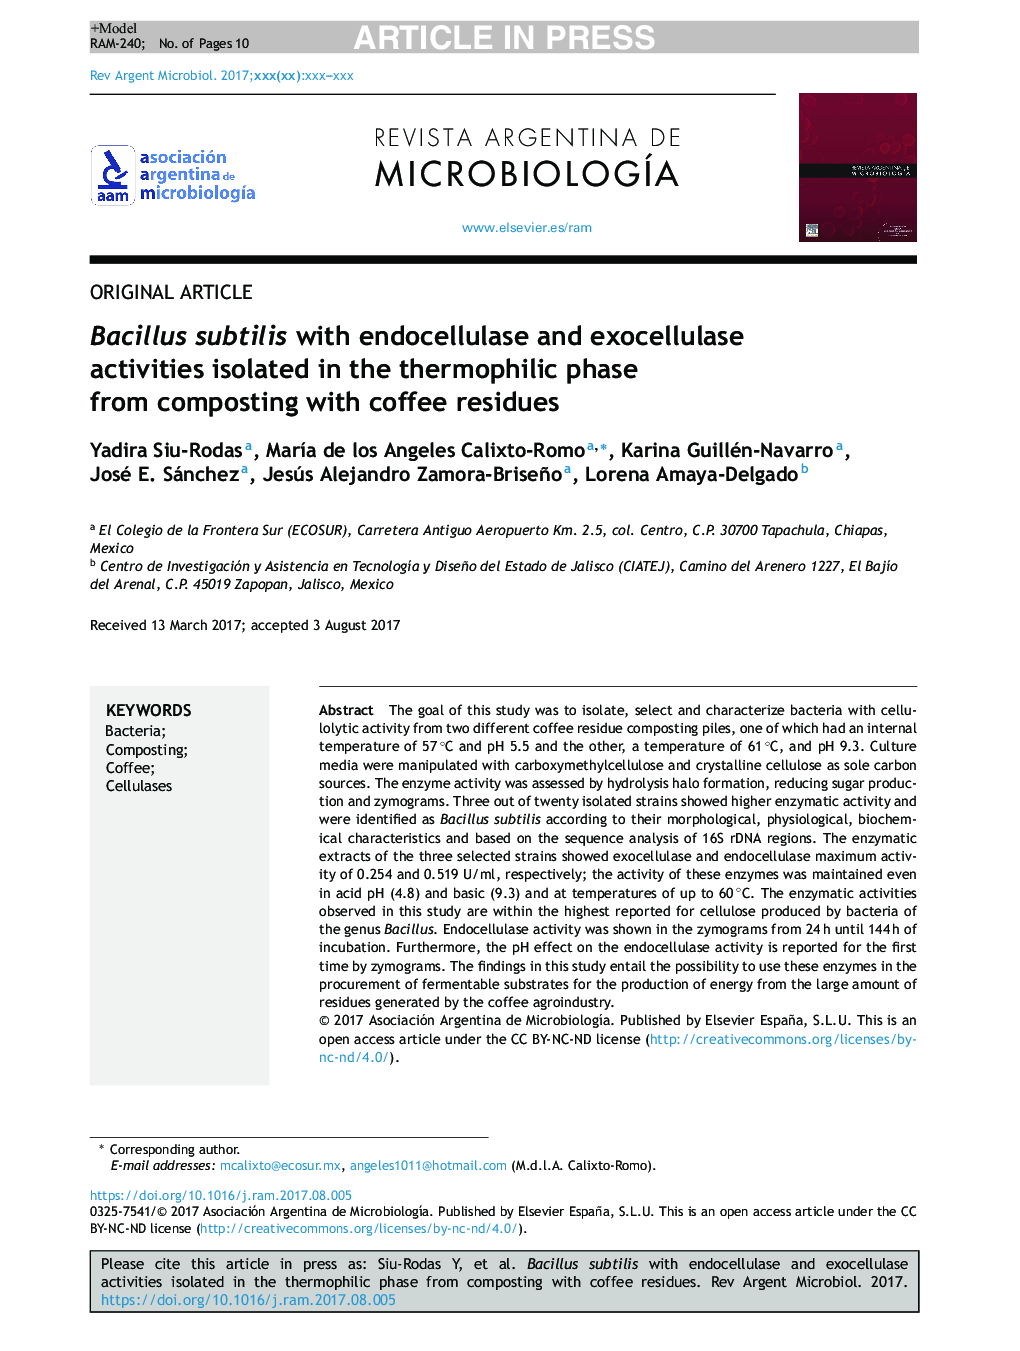 Bacillus subtilis with endocellulase and exocellulase activities isolated in the thermophilic phase from composting with coffee residues